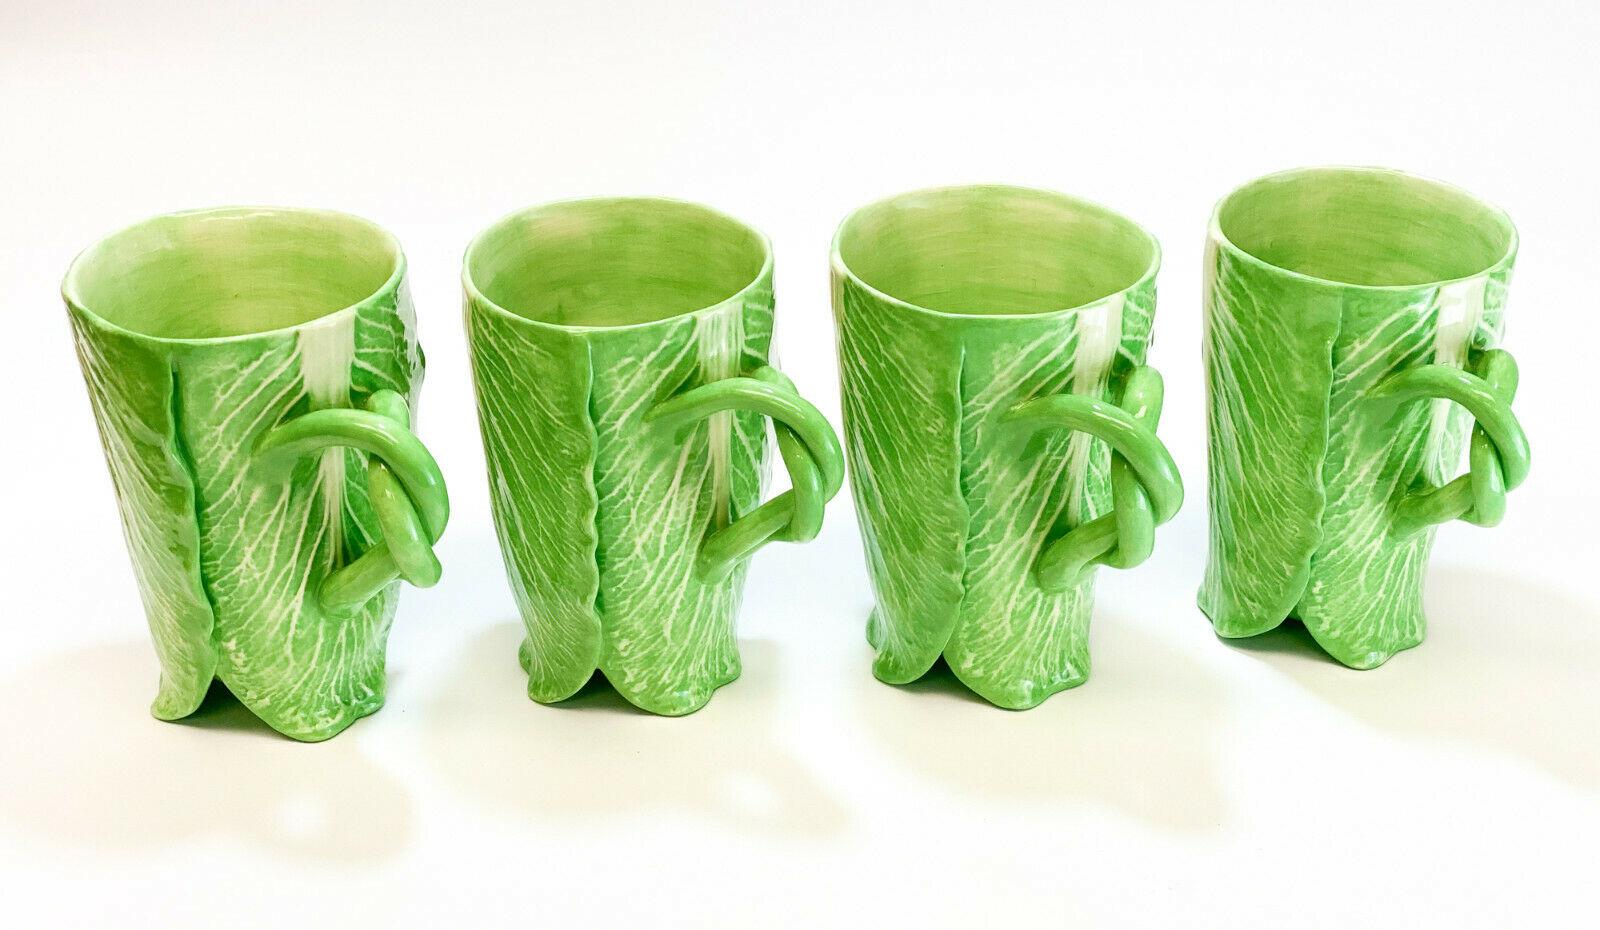 4 Dodie Thayer Jupiter Lettuce Leaf Earthenware Porcelain Hand Crafted Mugs In Good Condition For Sale In Pasadena, CA